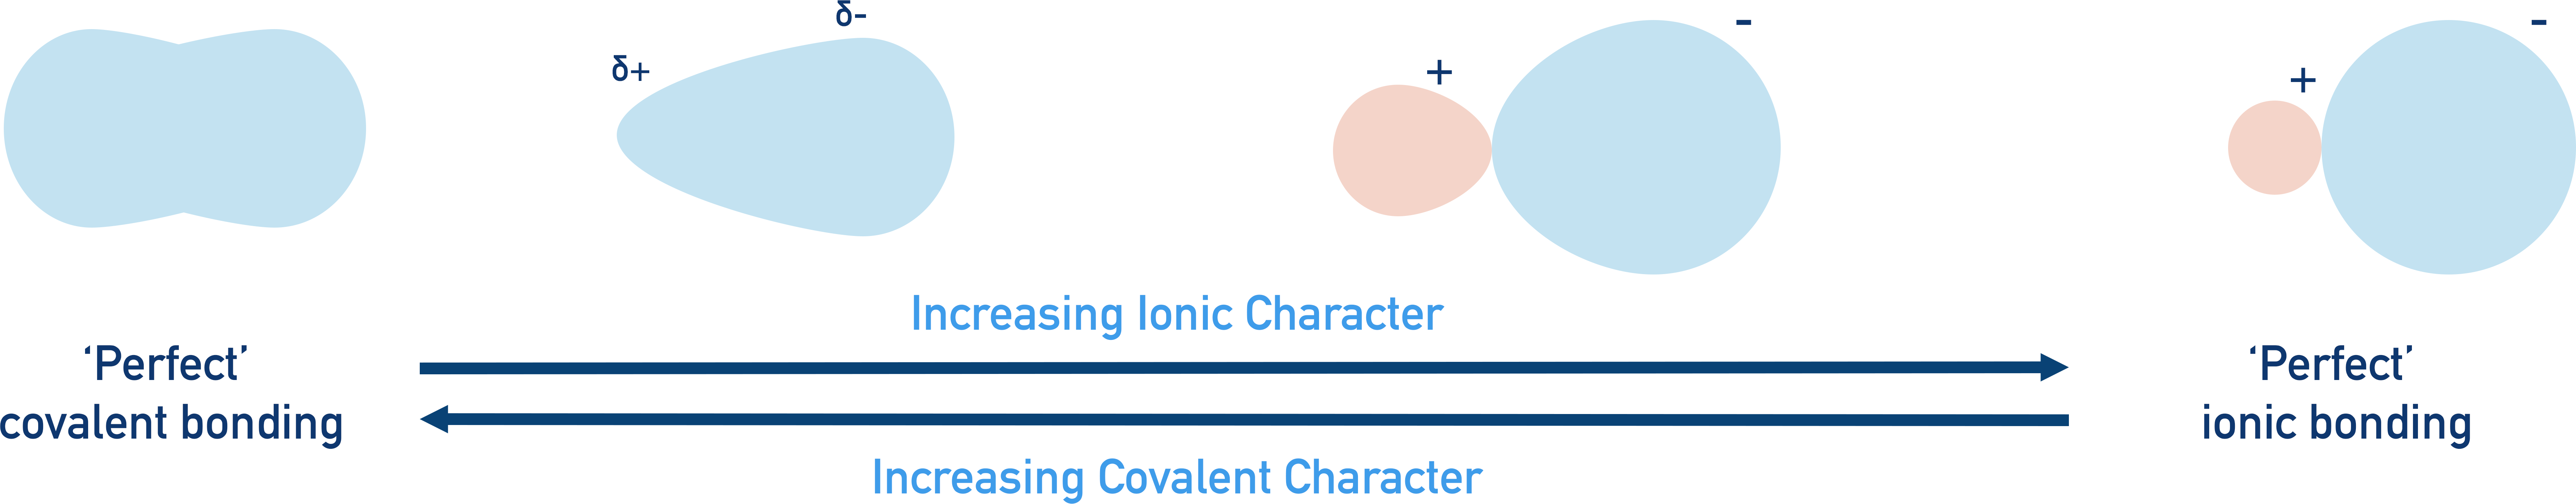 covalent and ionic character bonding perfect covalent perfect ionic